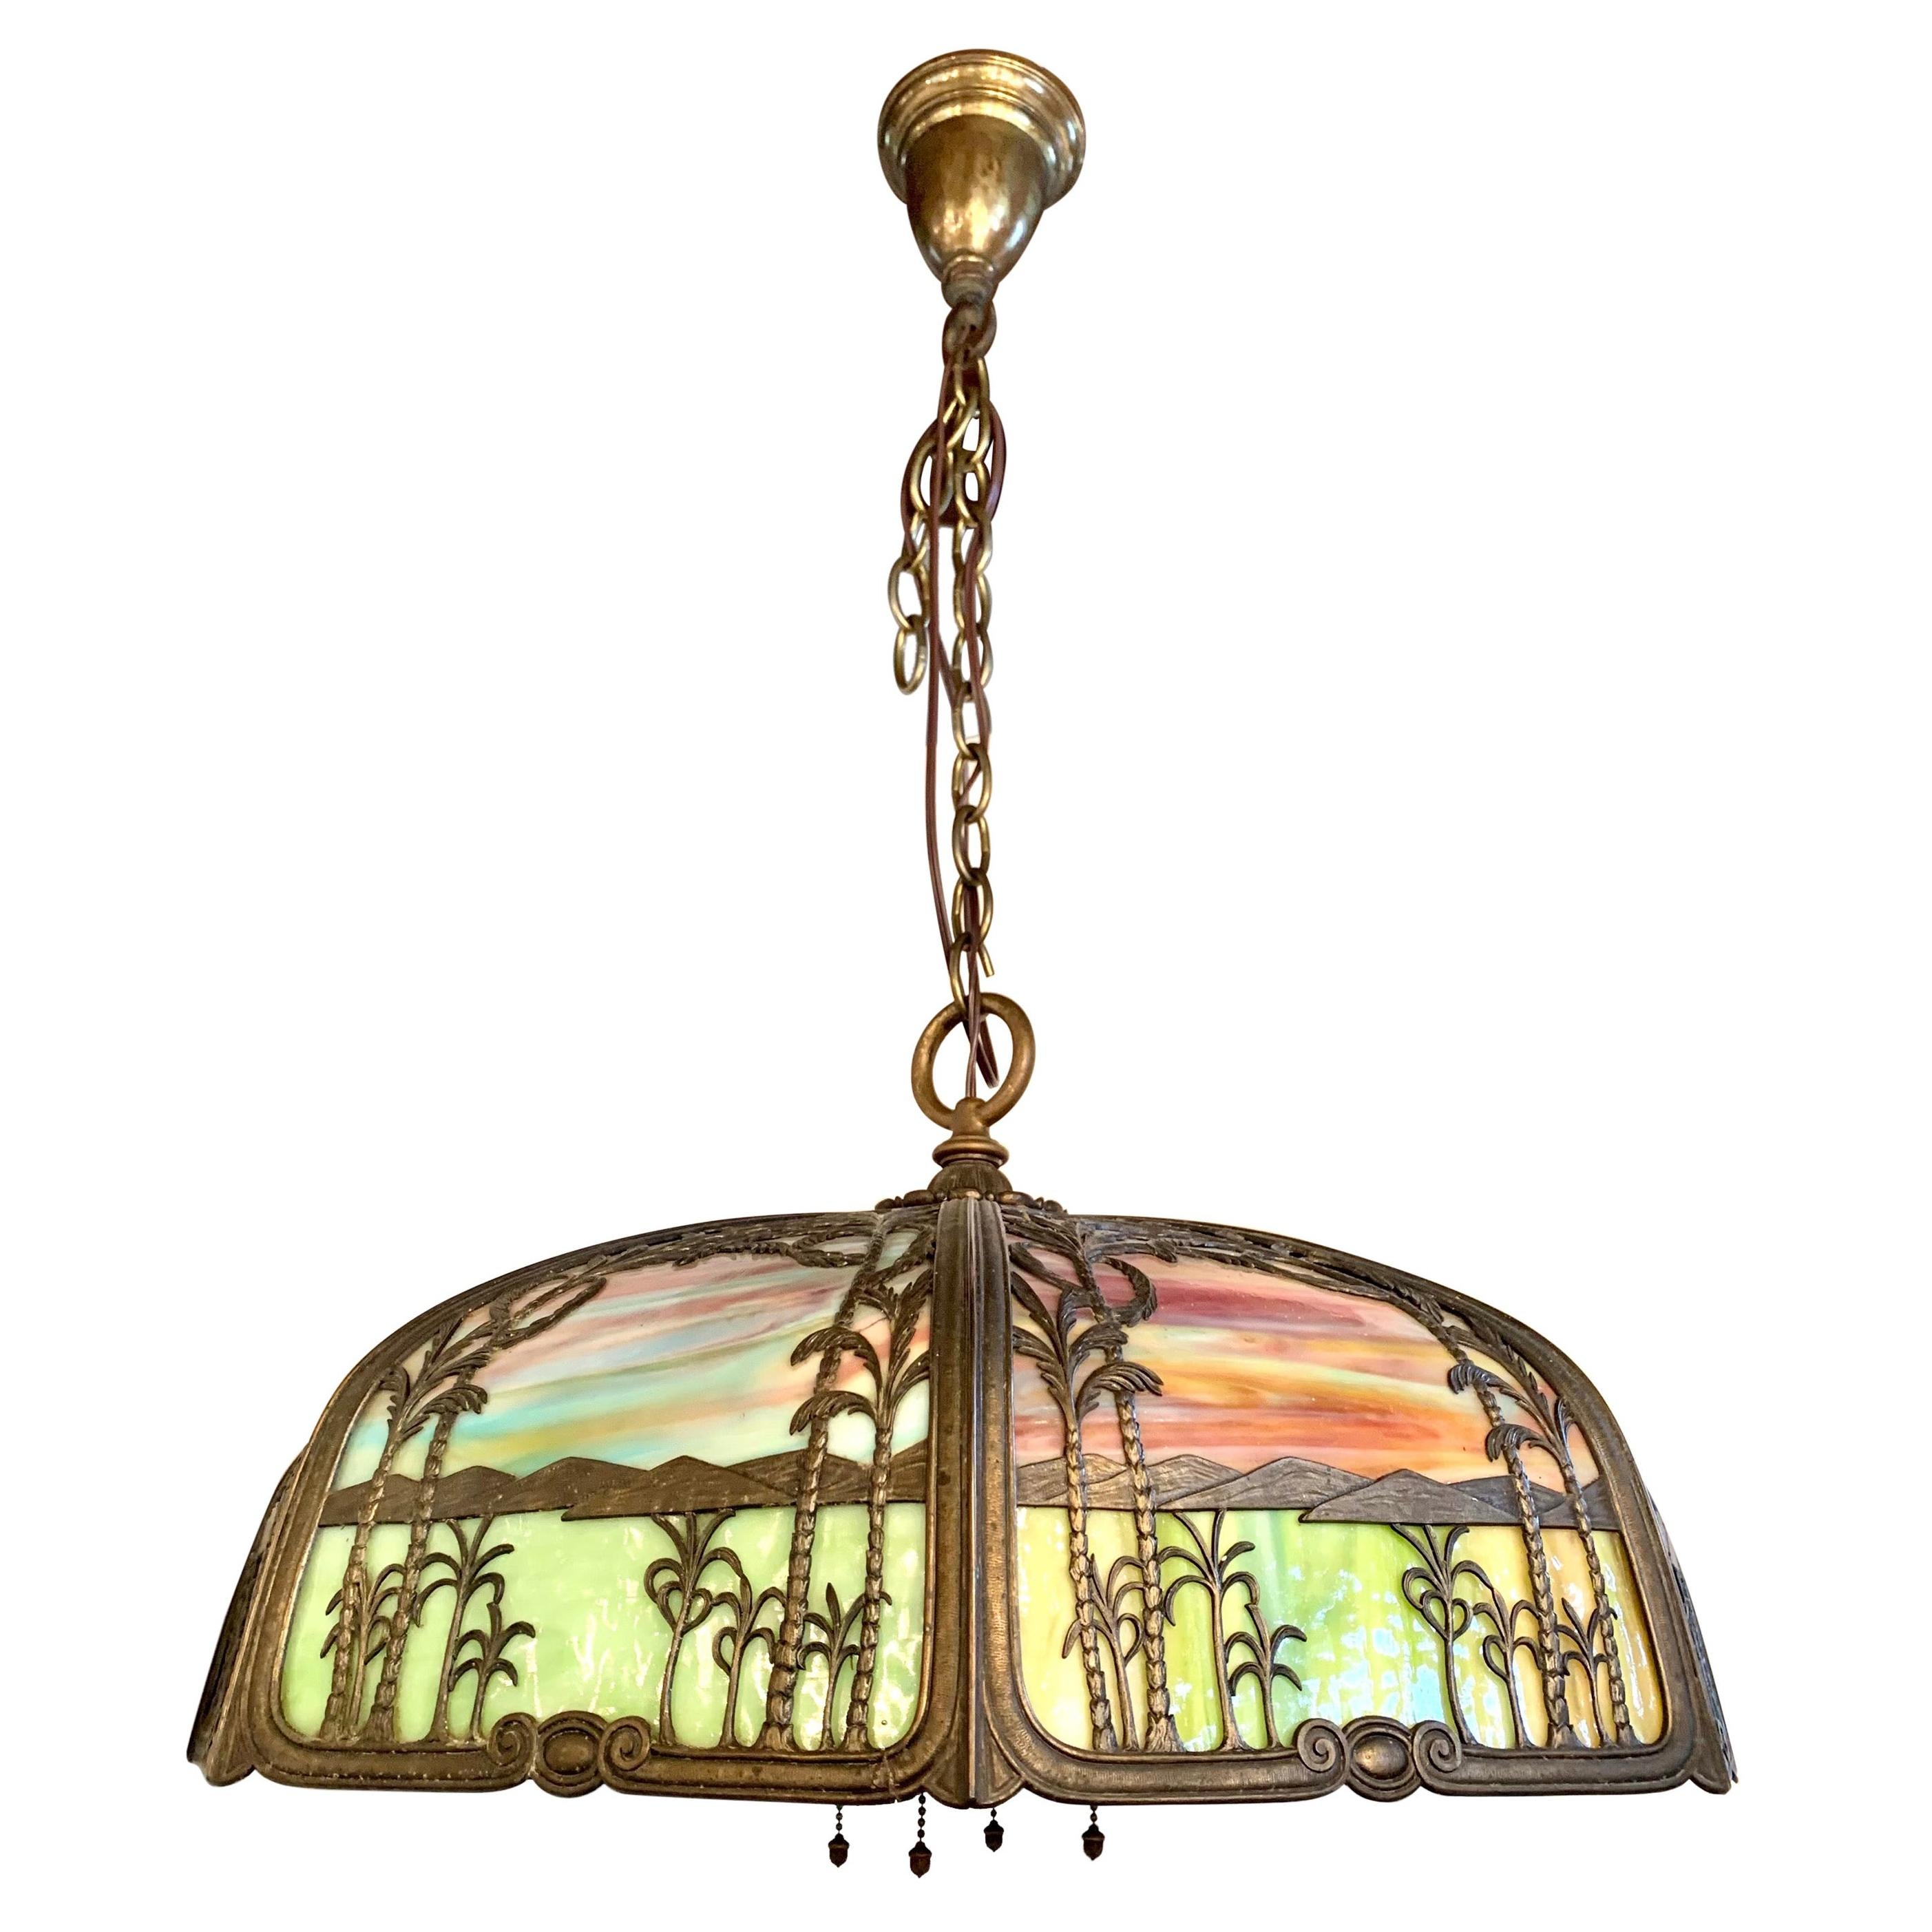 Handel Palm Tree Leaded Stained Glass Dome Light Chandelier